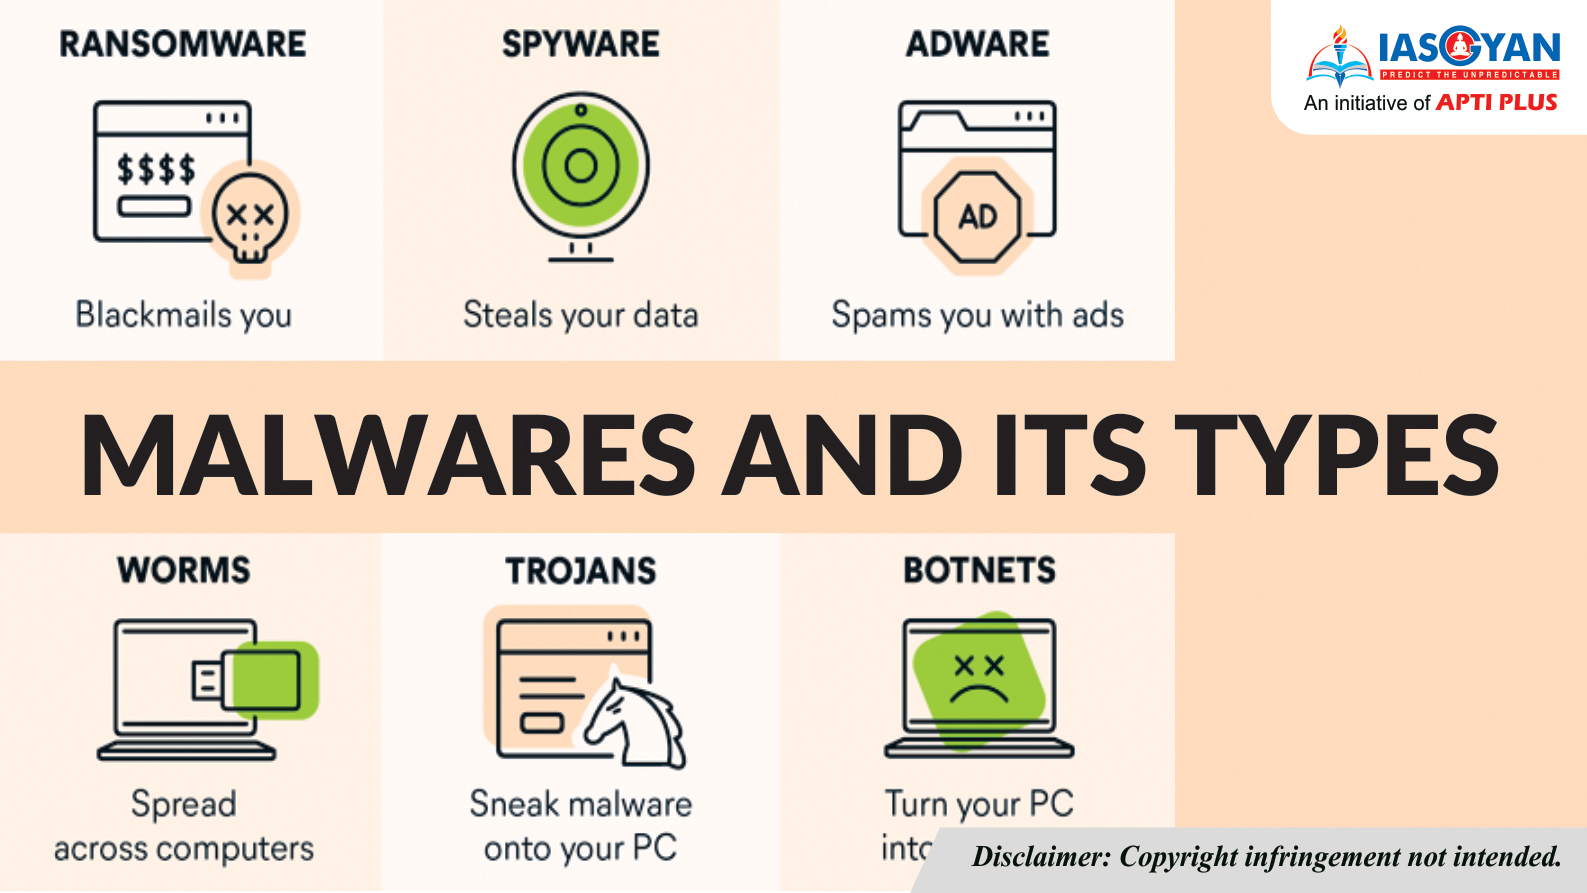 MALWARES AND ITS TYPES